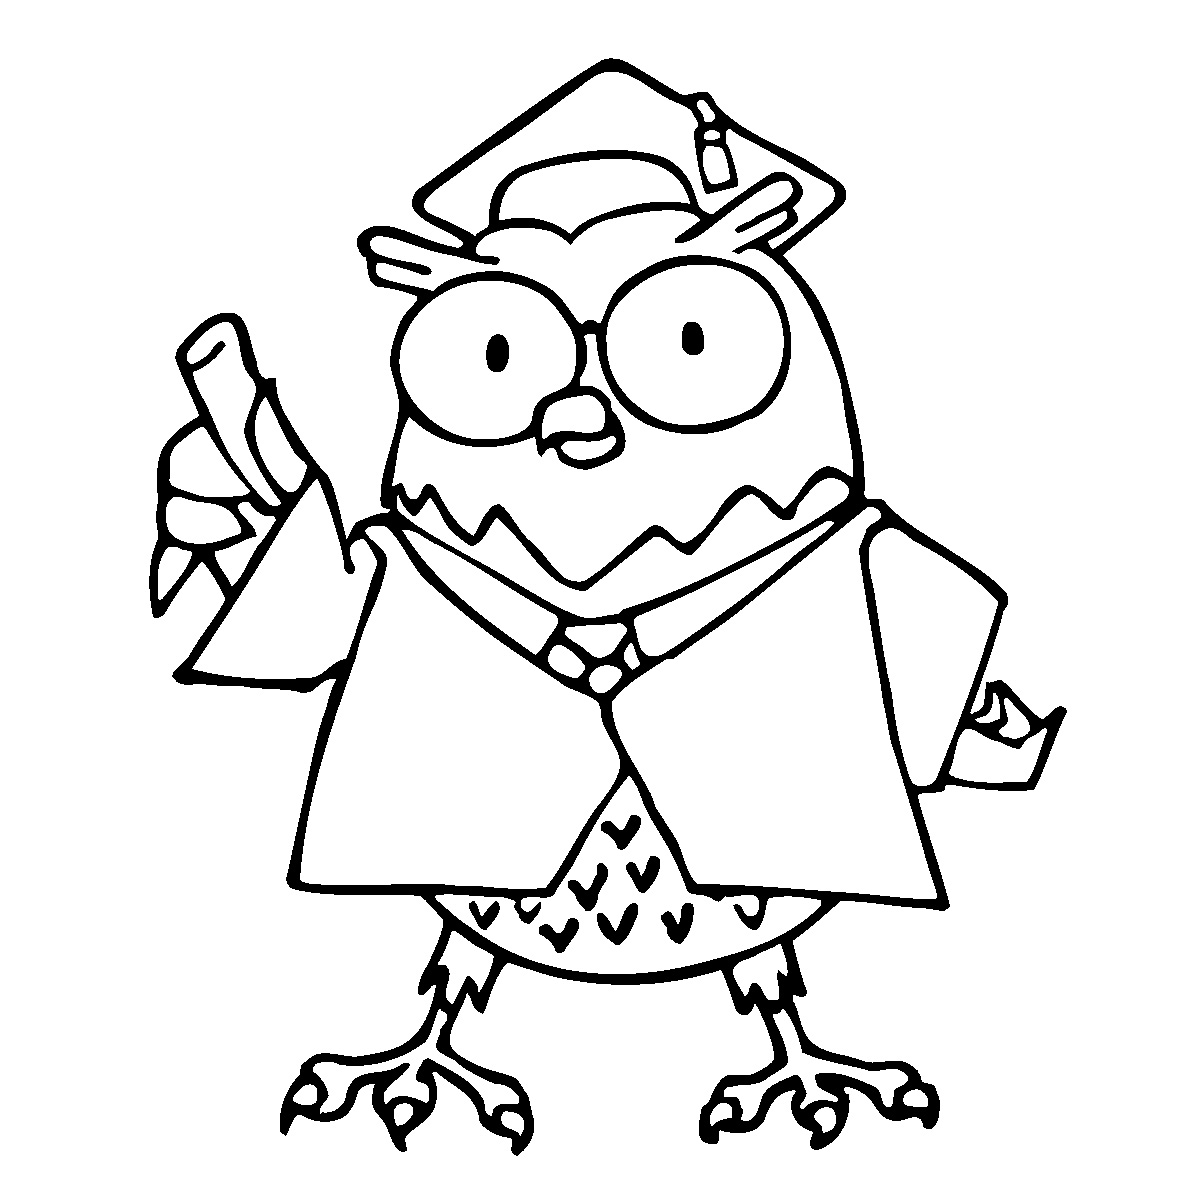 Trends For > Coloring Pages Of Cartoon Owls